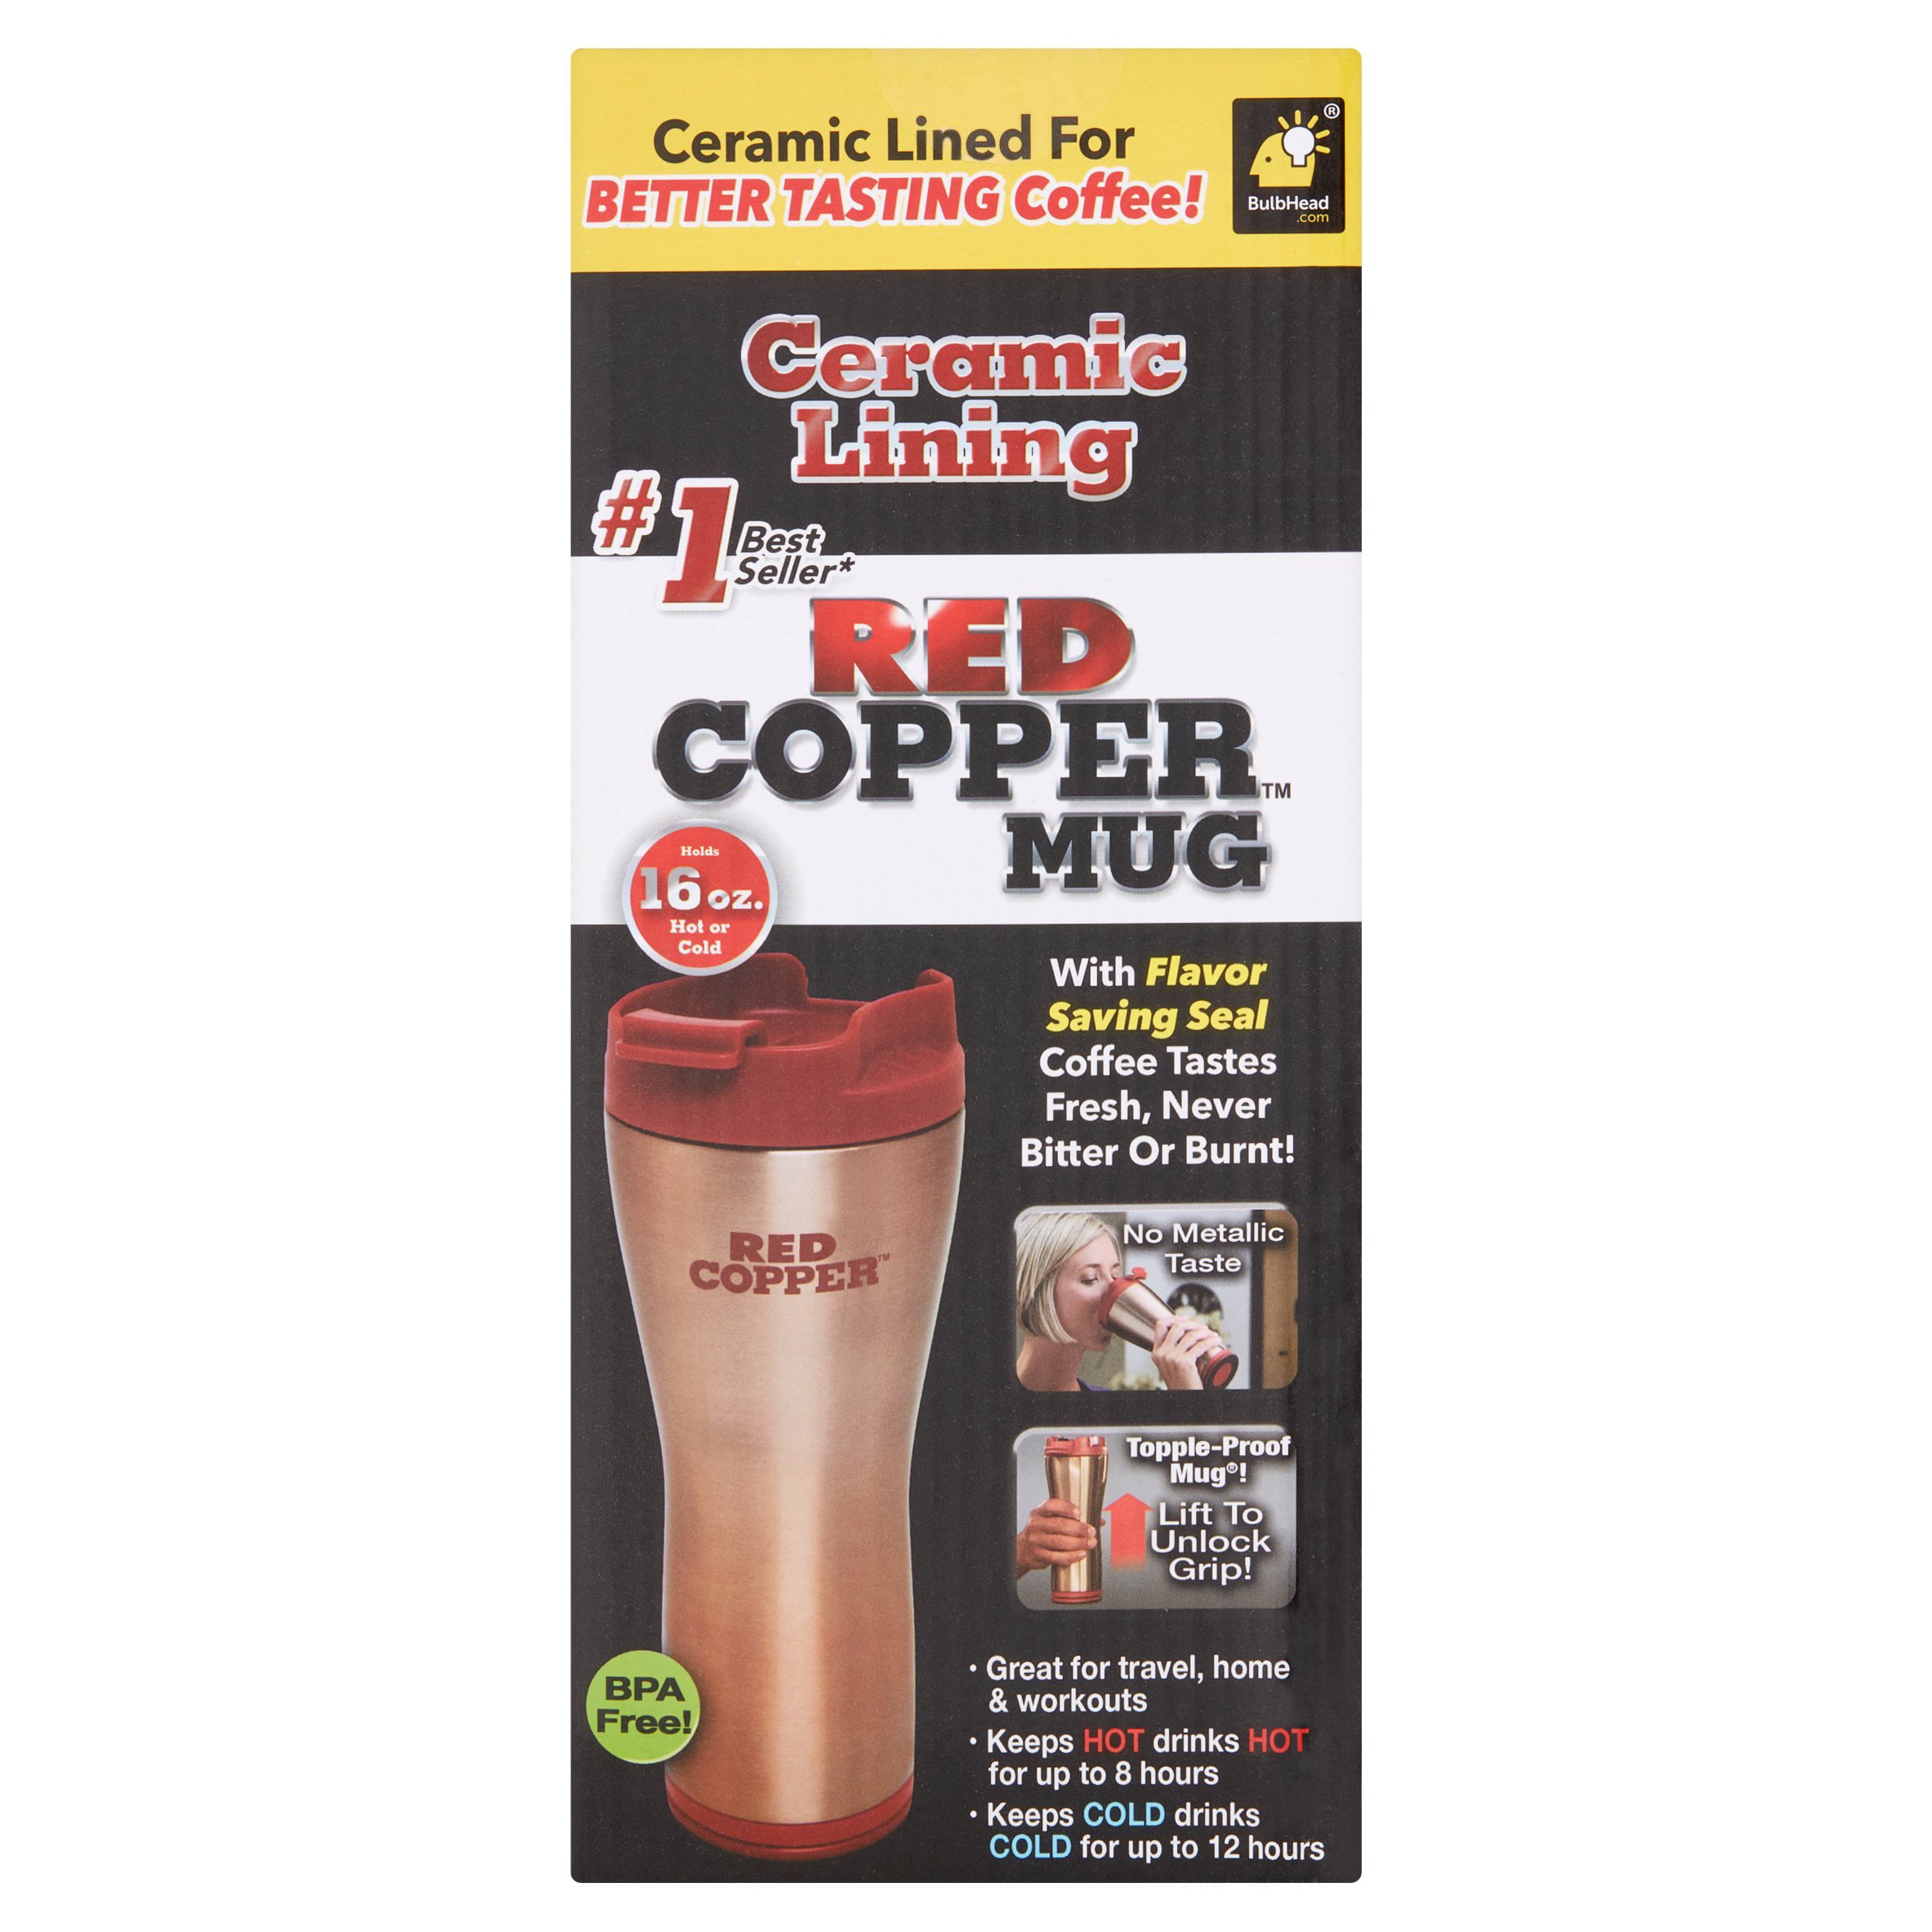 Does It Really Work: Red Copper Mug